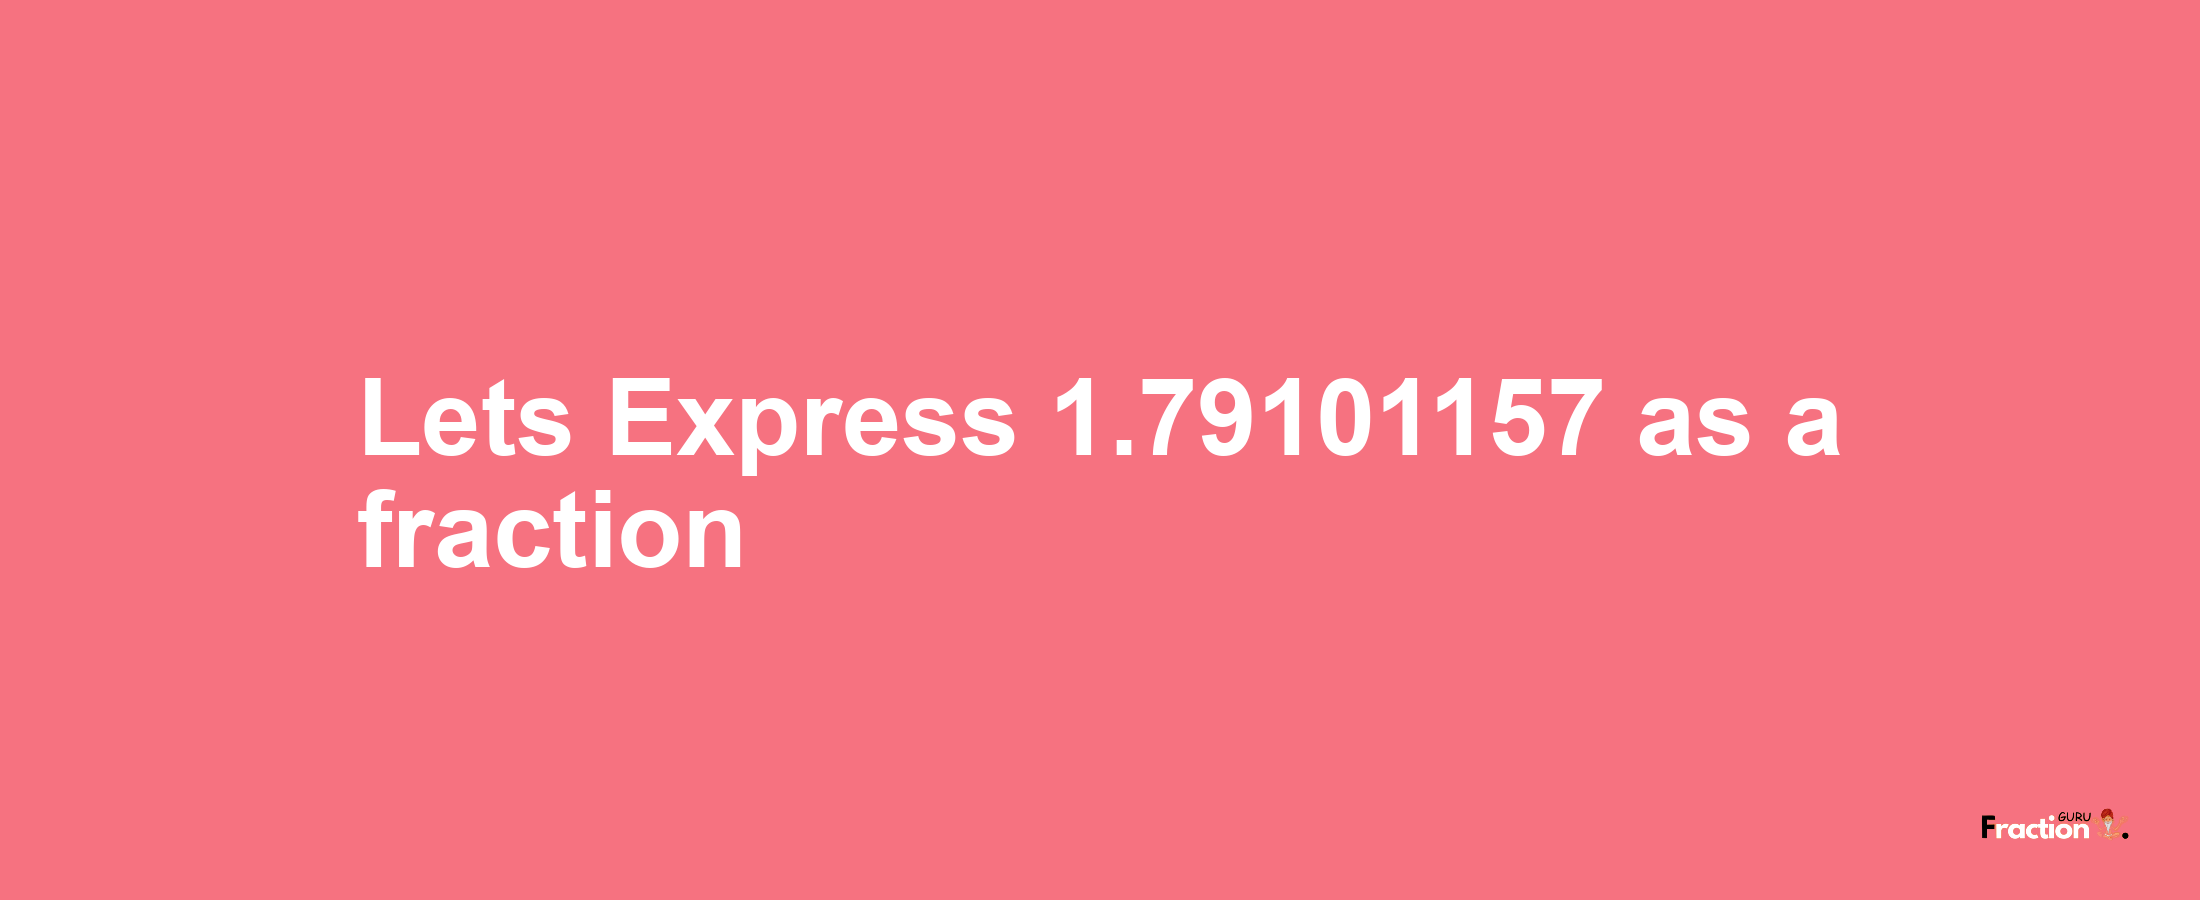 Lets Express 1.79101157 as afraction